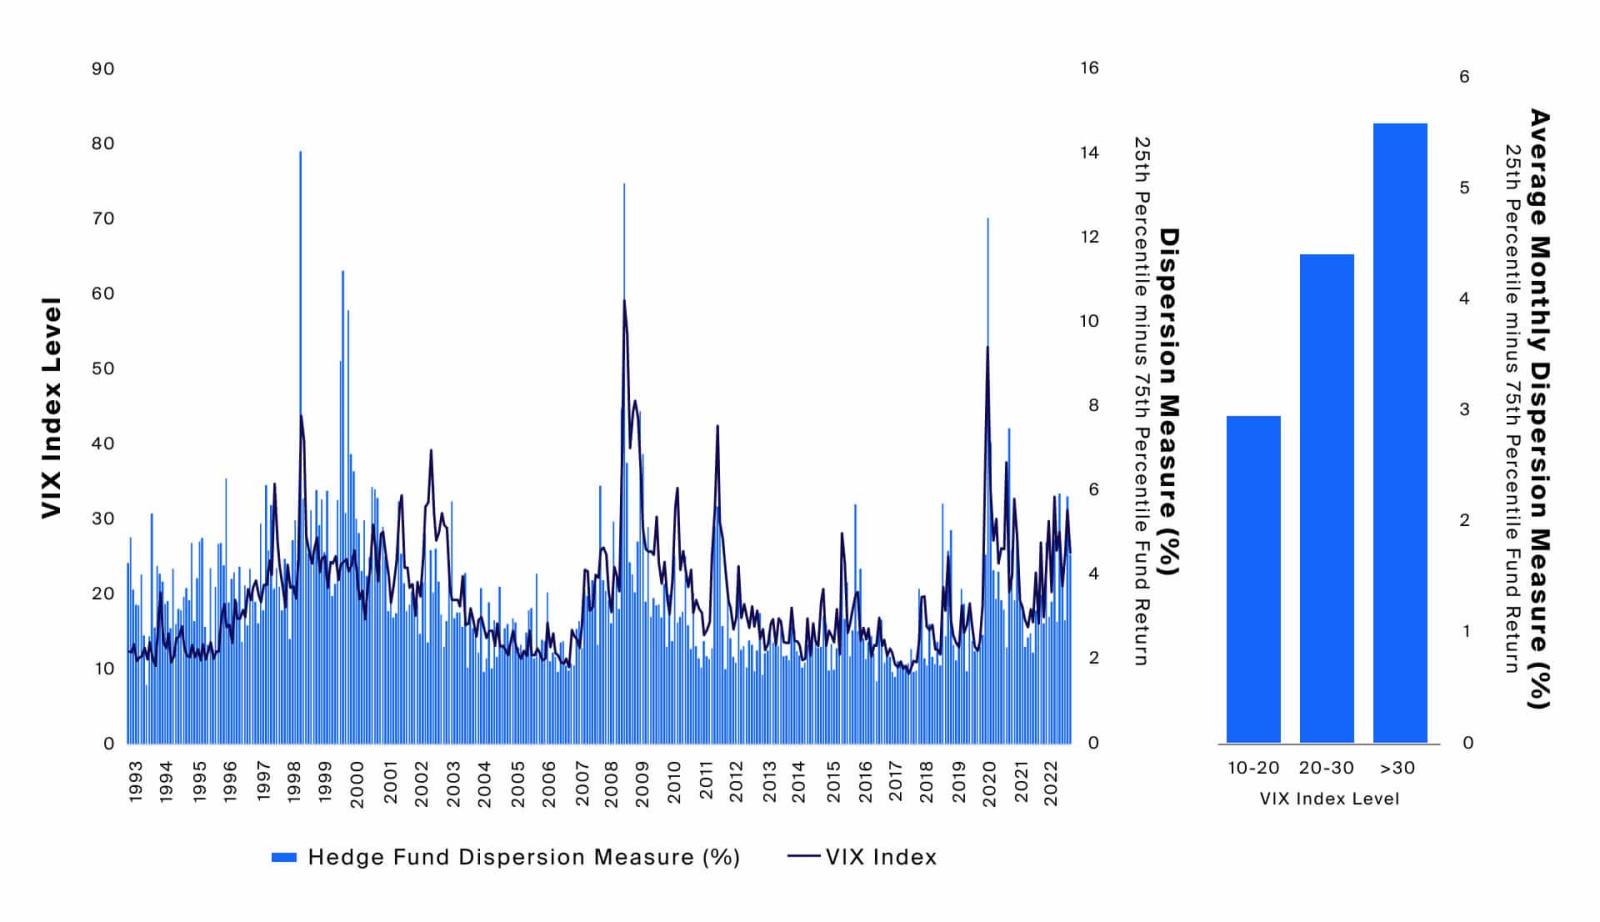 Manager dispersion may vary over time—performance outcomes for hedge funds widened in higher volatility market environments (Exhibit 3)